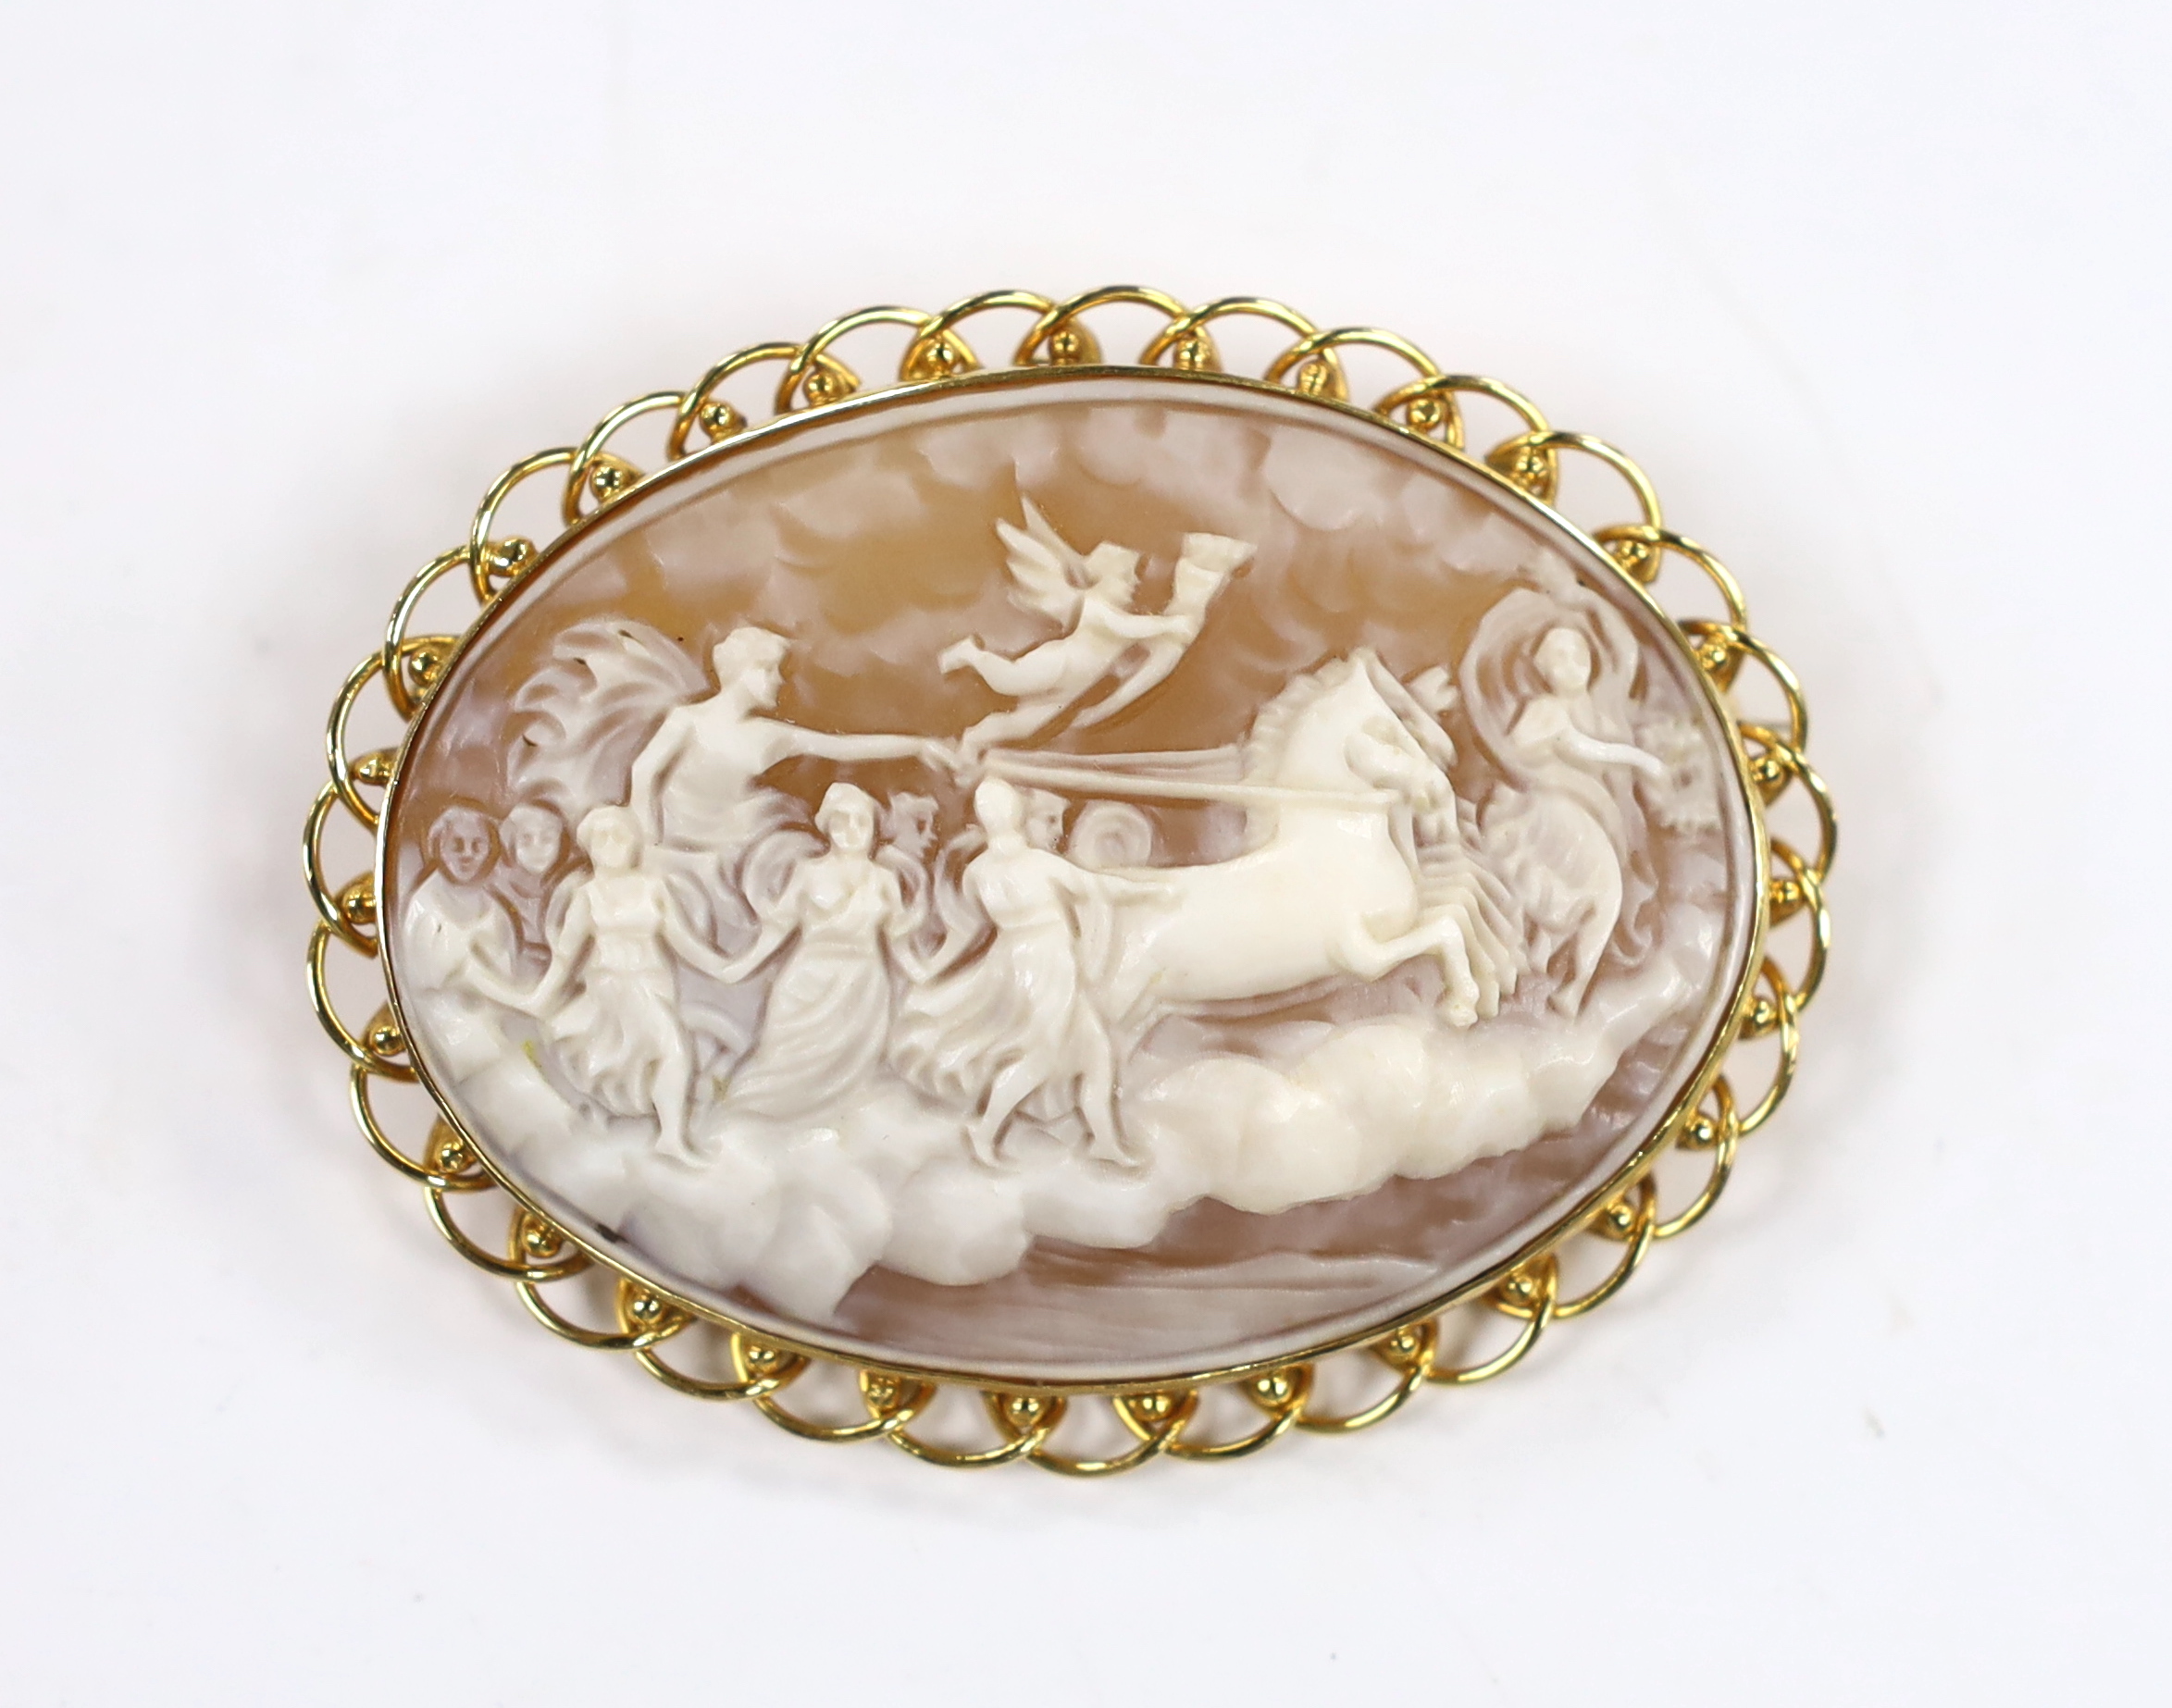 A modern 18k mounted oval cameo shell pendant brooch, carved with Phoebus and the hours preceded by Aurora, 58mm, gross weight 16 grams.